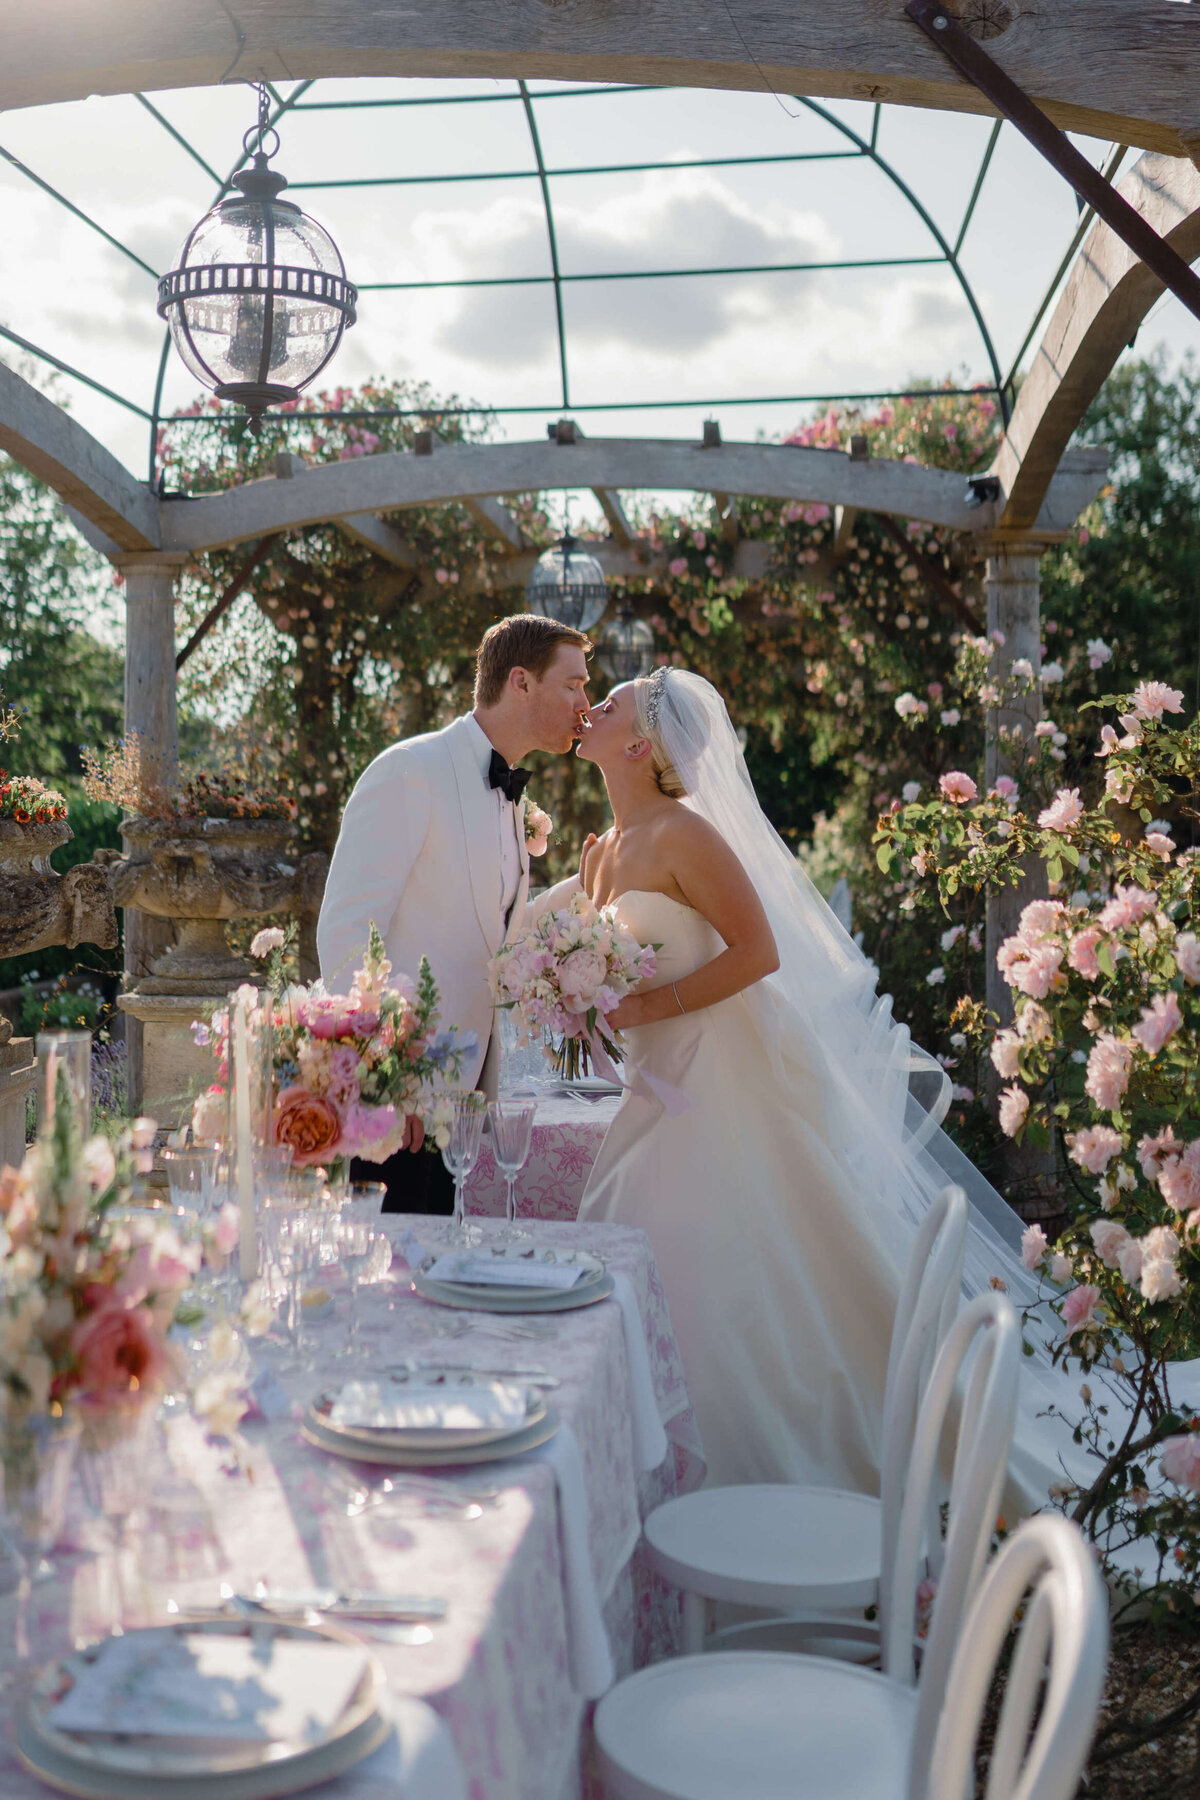 bride and groom kiss under the rose arbour next to their wedding dinner table which is set with pink and white floral linen in the romantic venue euridge manor